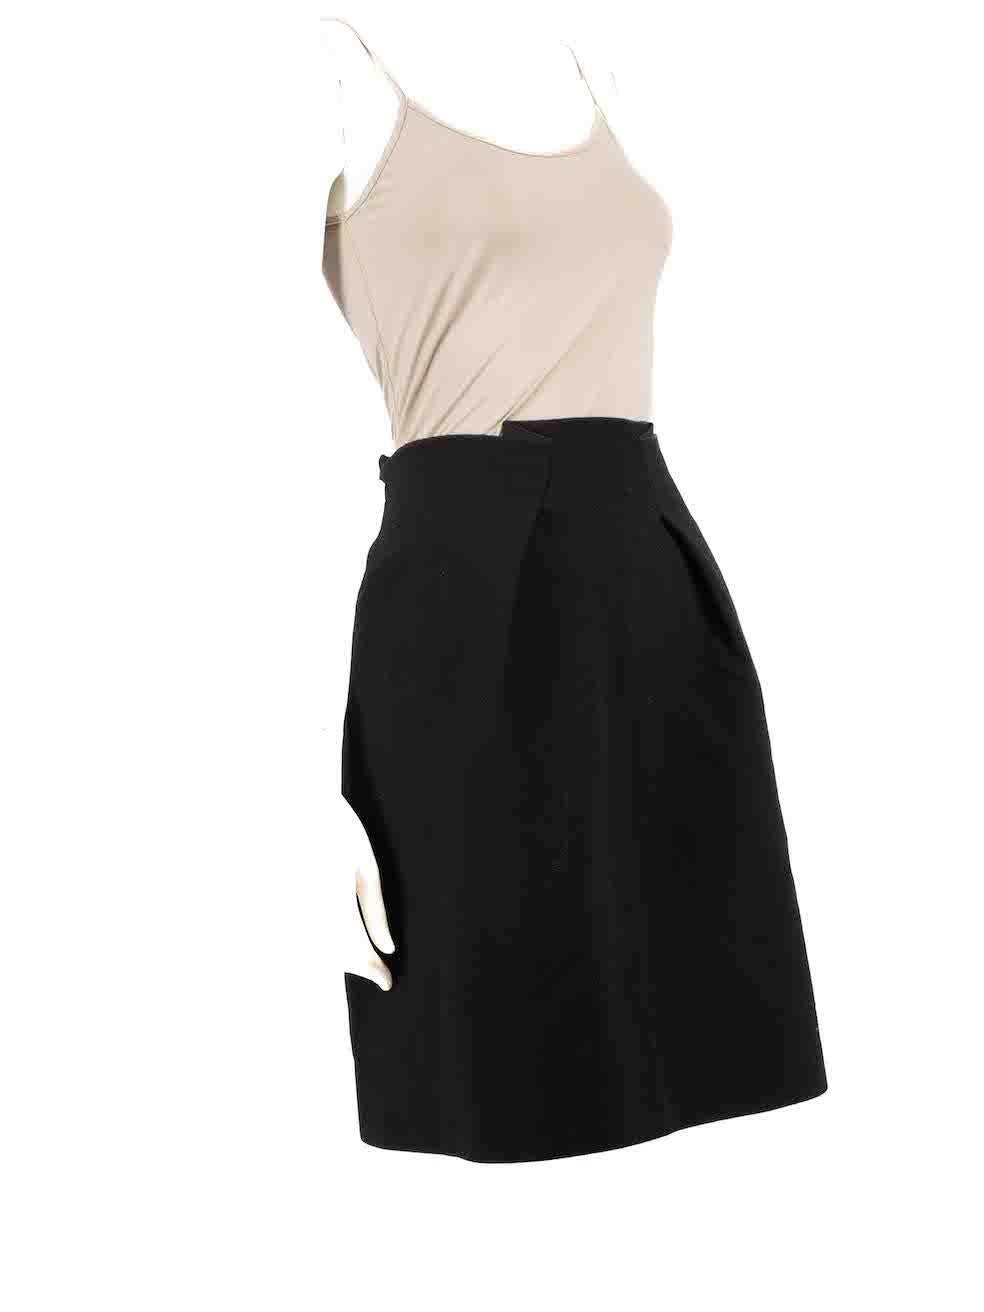 CONDITION is Very good. Hardly any visible wear to skirt is evident on this used Roland Mouret designer resale item.
 
 
 
 Details
 
 
 Black
 
 Wool
 
 Fitted skirt
 
 Knee length
 
 Gathered accent on waist
 
 2x Front side pockets
 
 Back full